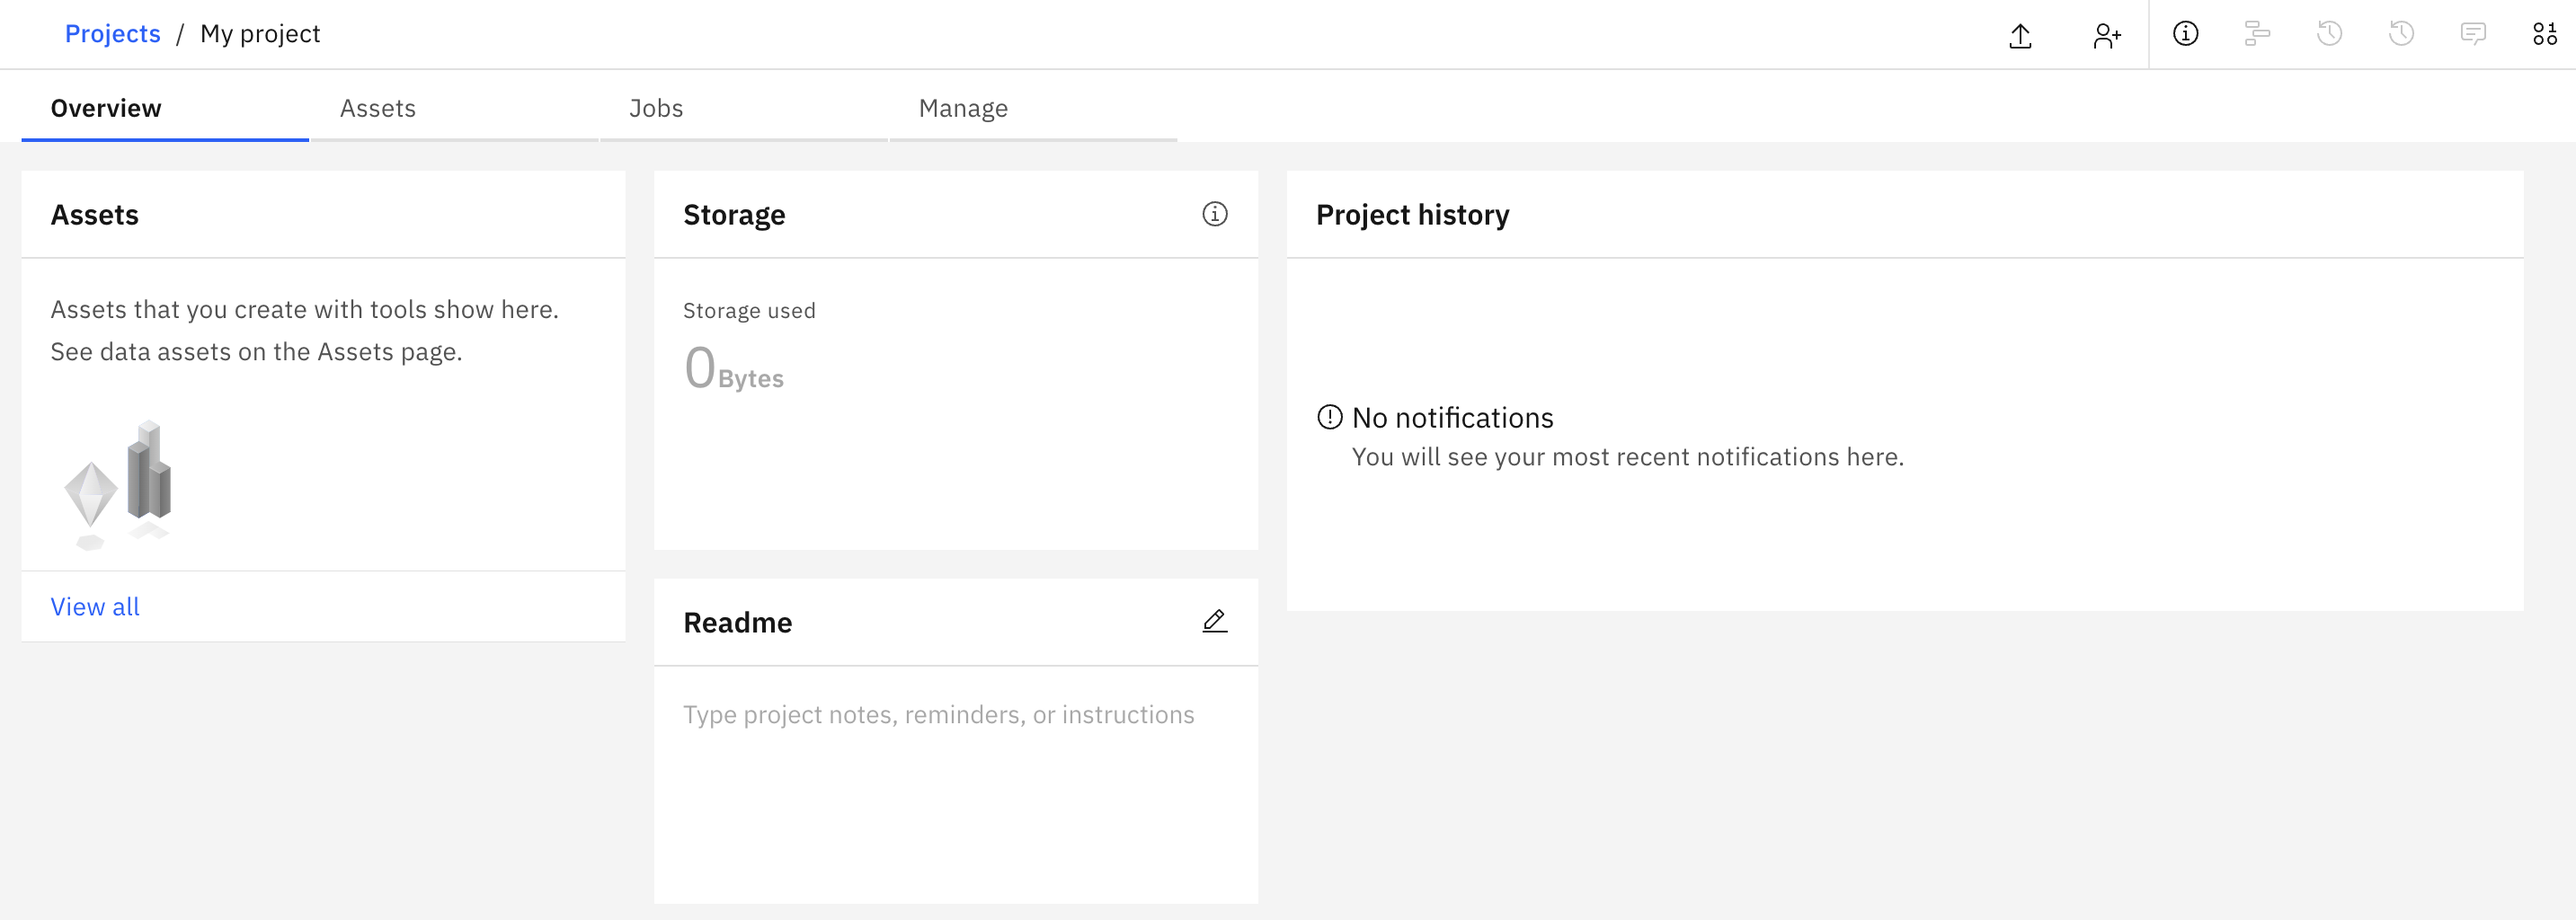 Screenshot of the new projects UI